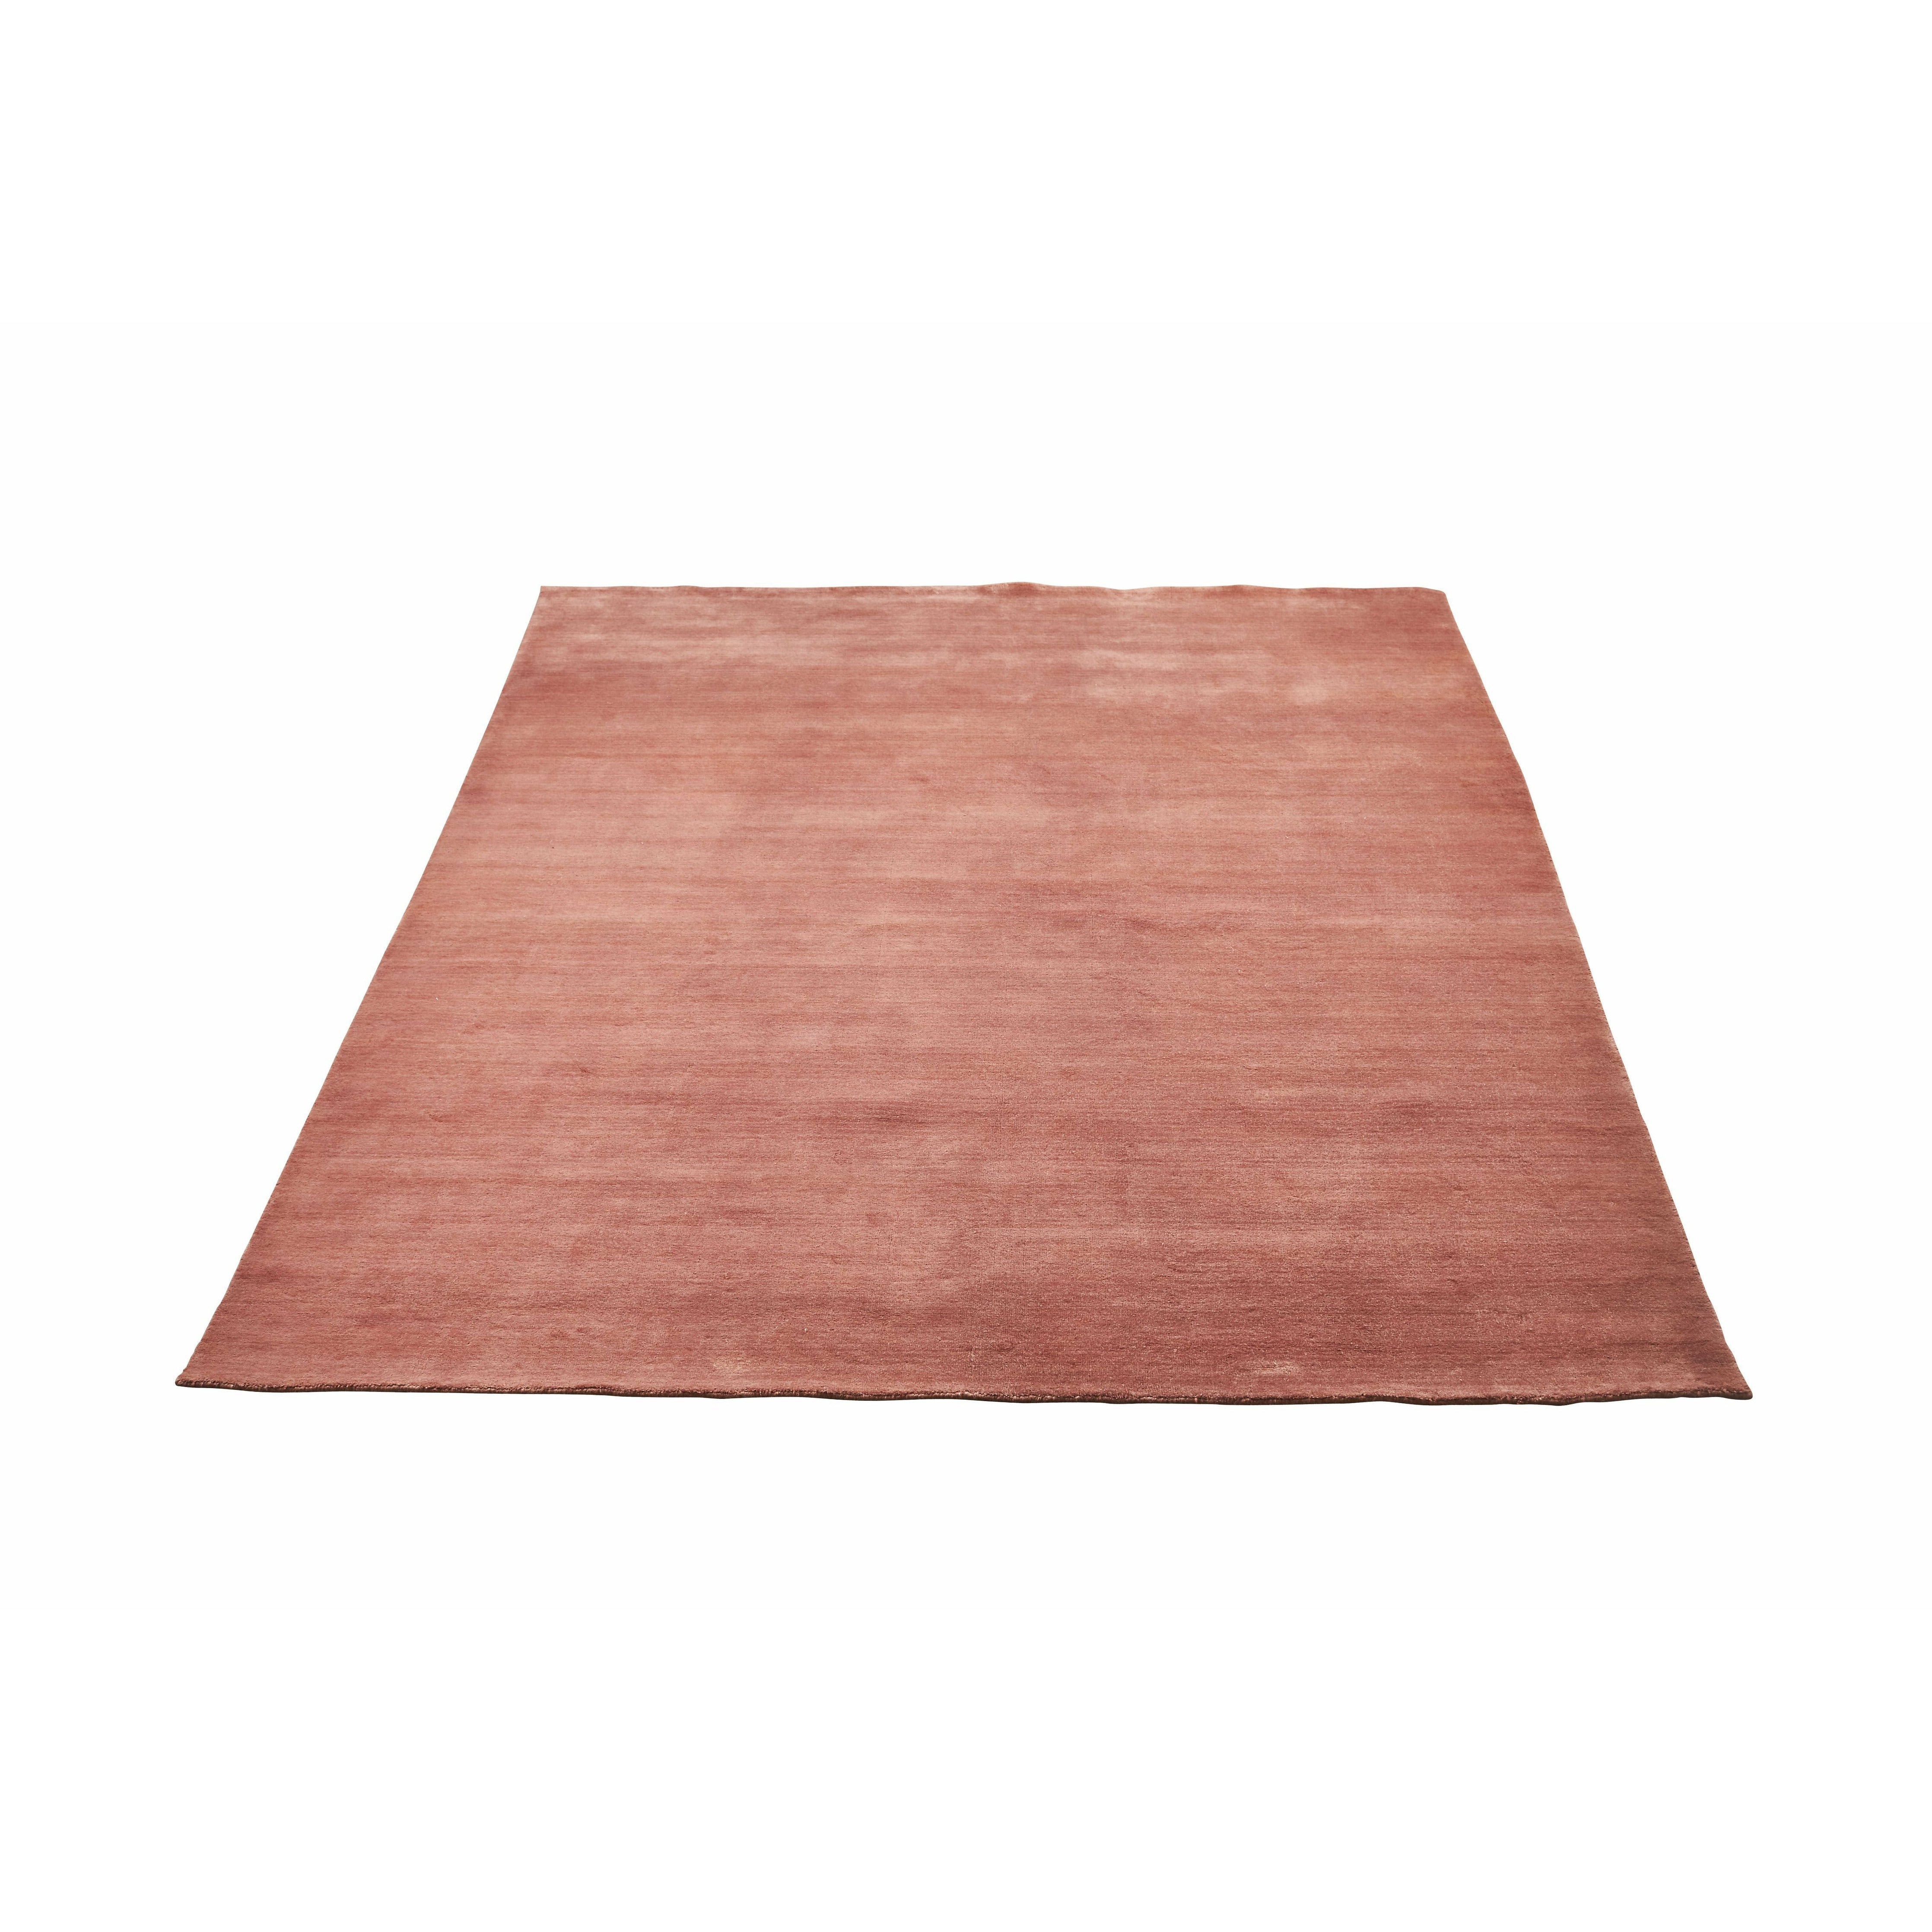 Massimo Earth Tapis Bambou Terre Cuite, 140x200 Cm